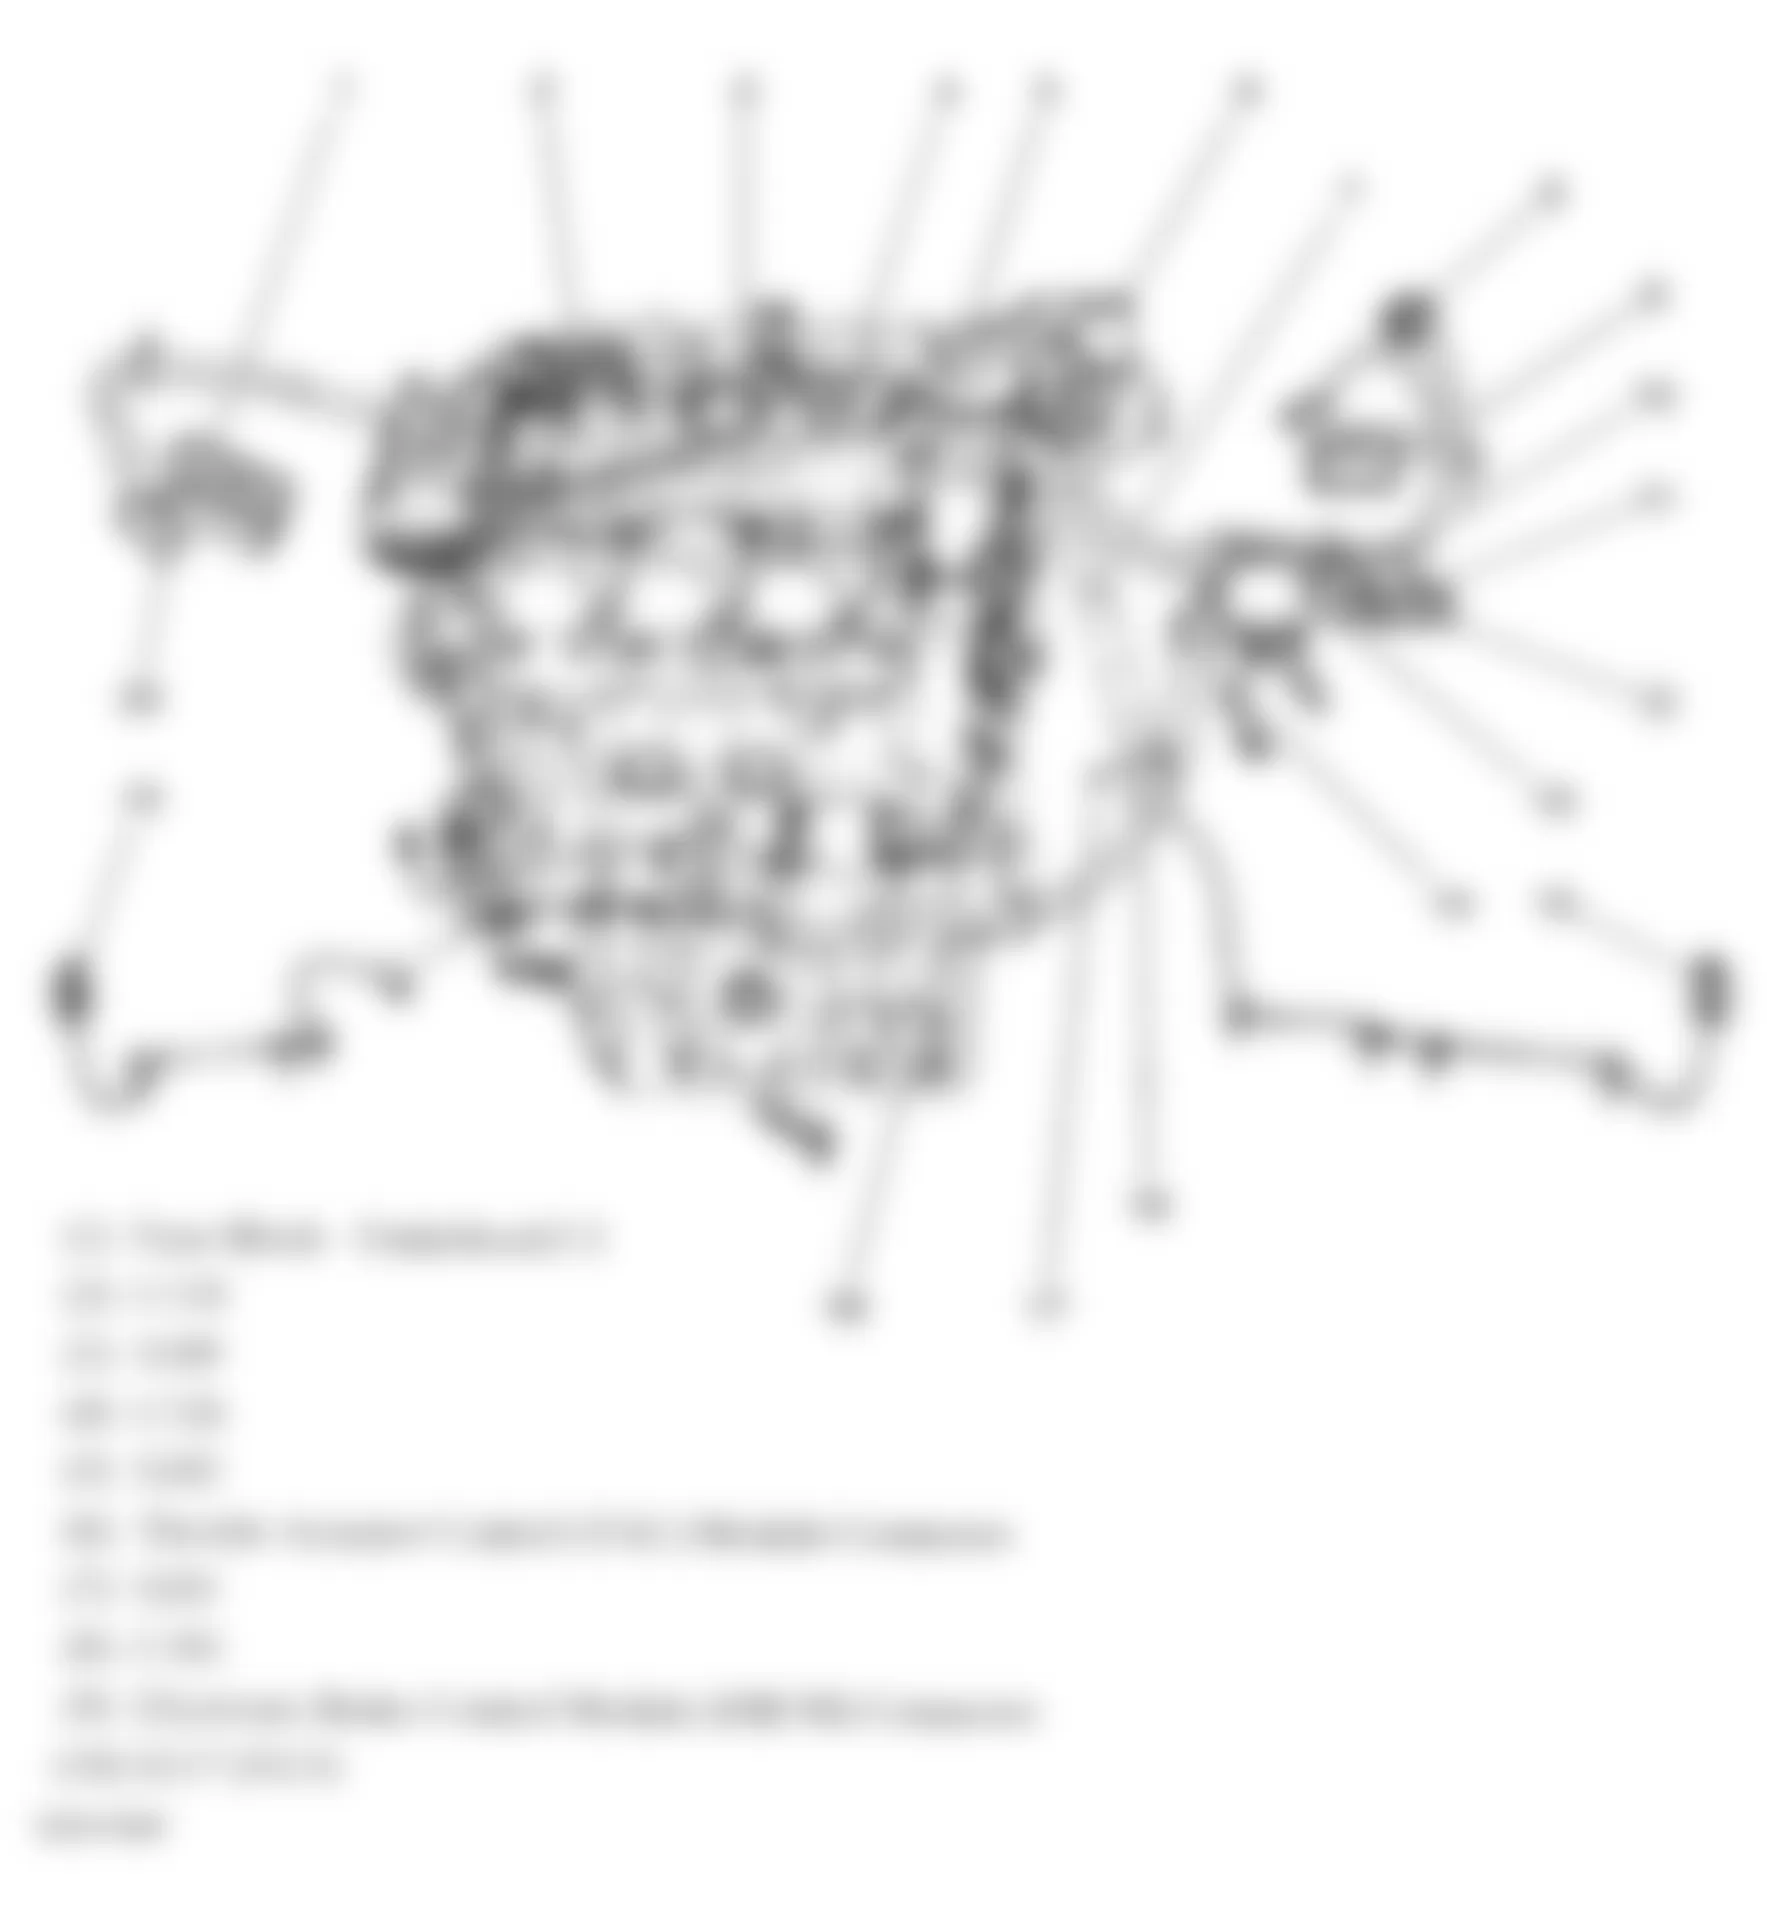 Buick LaCrosse CXL 2006 - Component Locations -  Left Side Of Engine (3.6L) (1 Of 2)